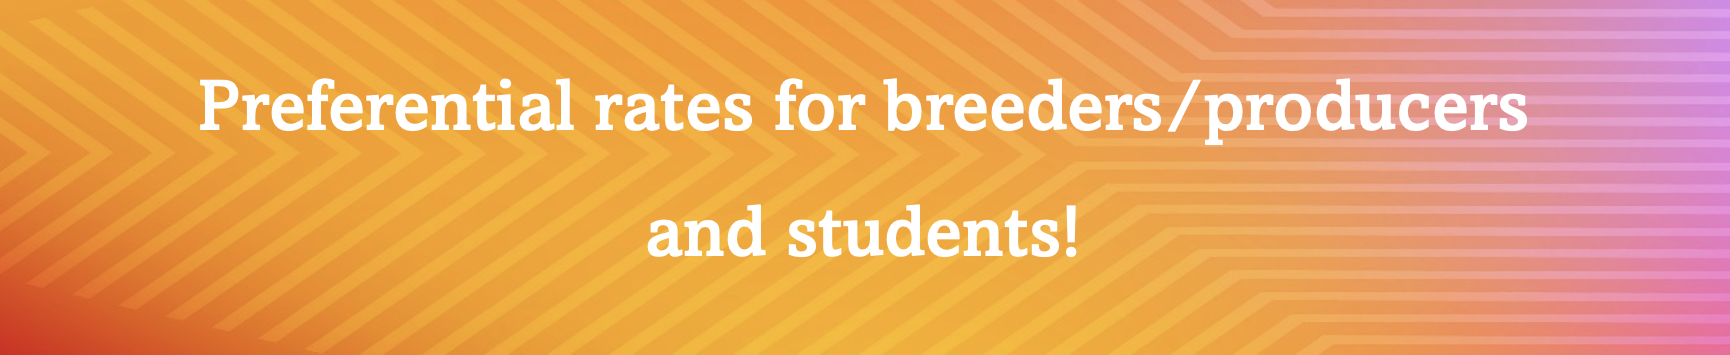 Preferential rates for breeders/producers and students!